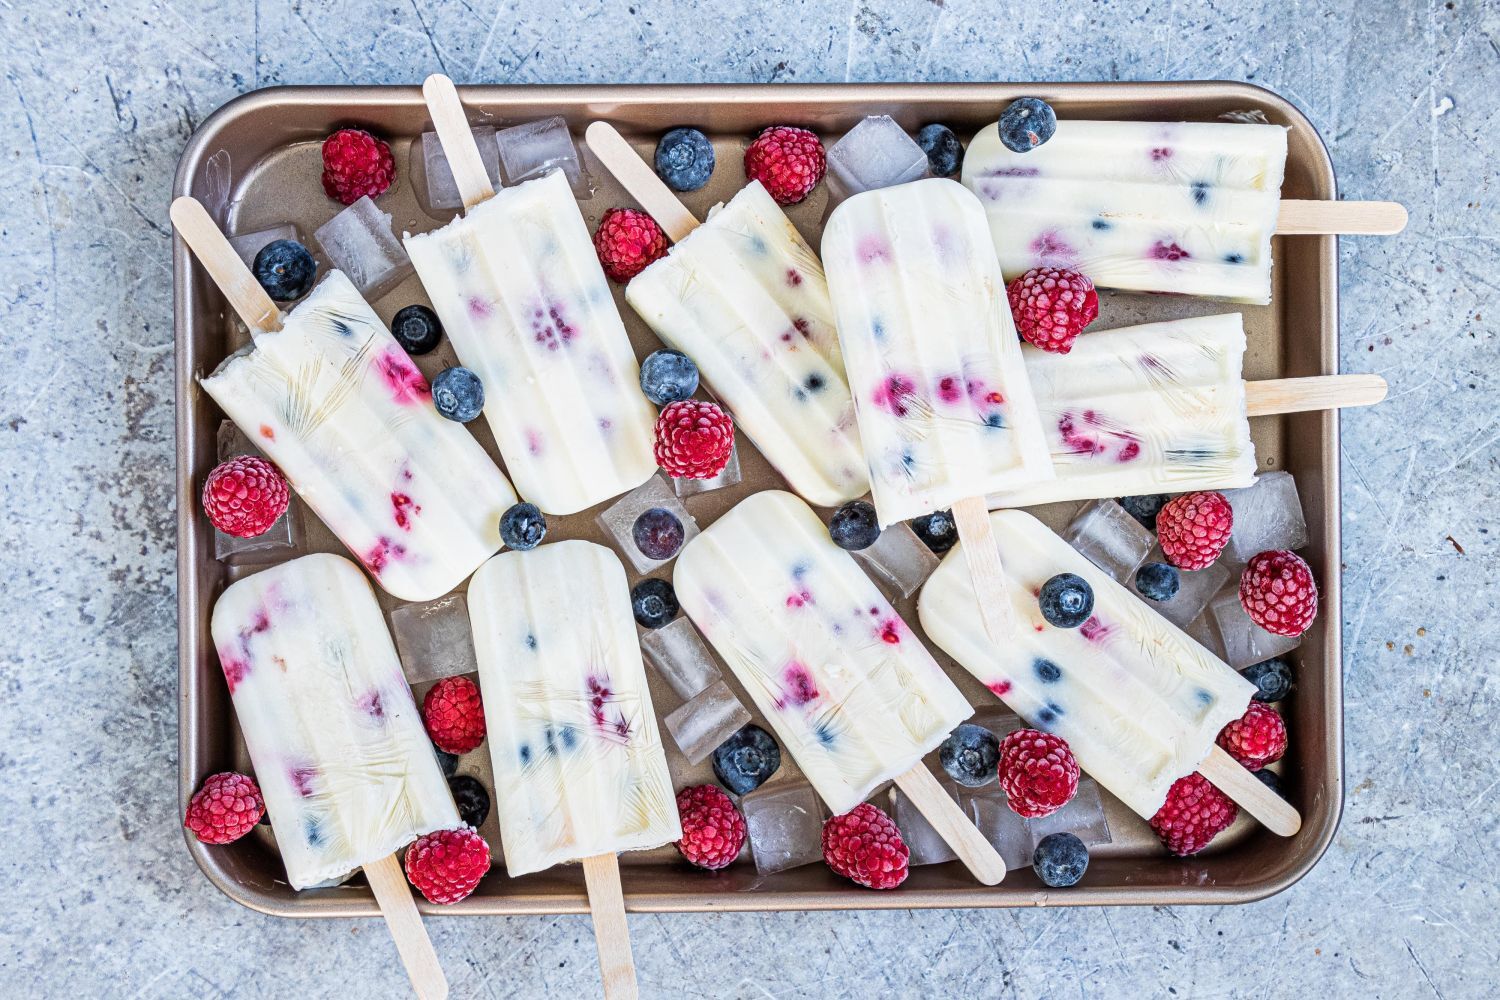 Fruit and yogurt popsicles with blueberries and raspberries on a tray with ice.